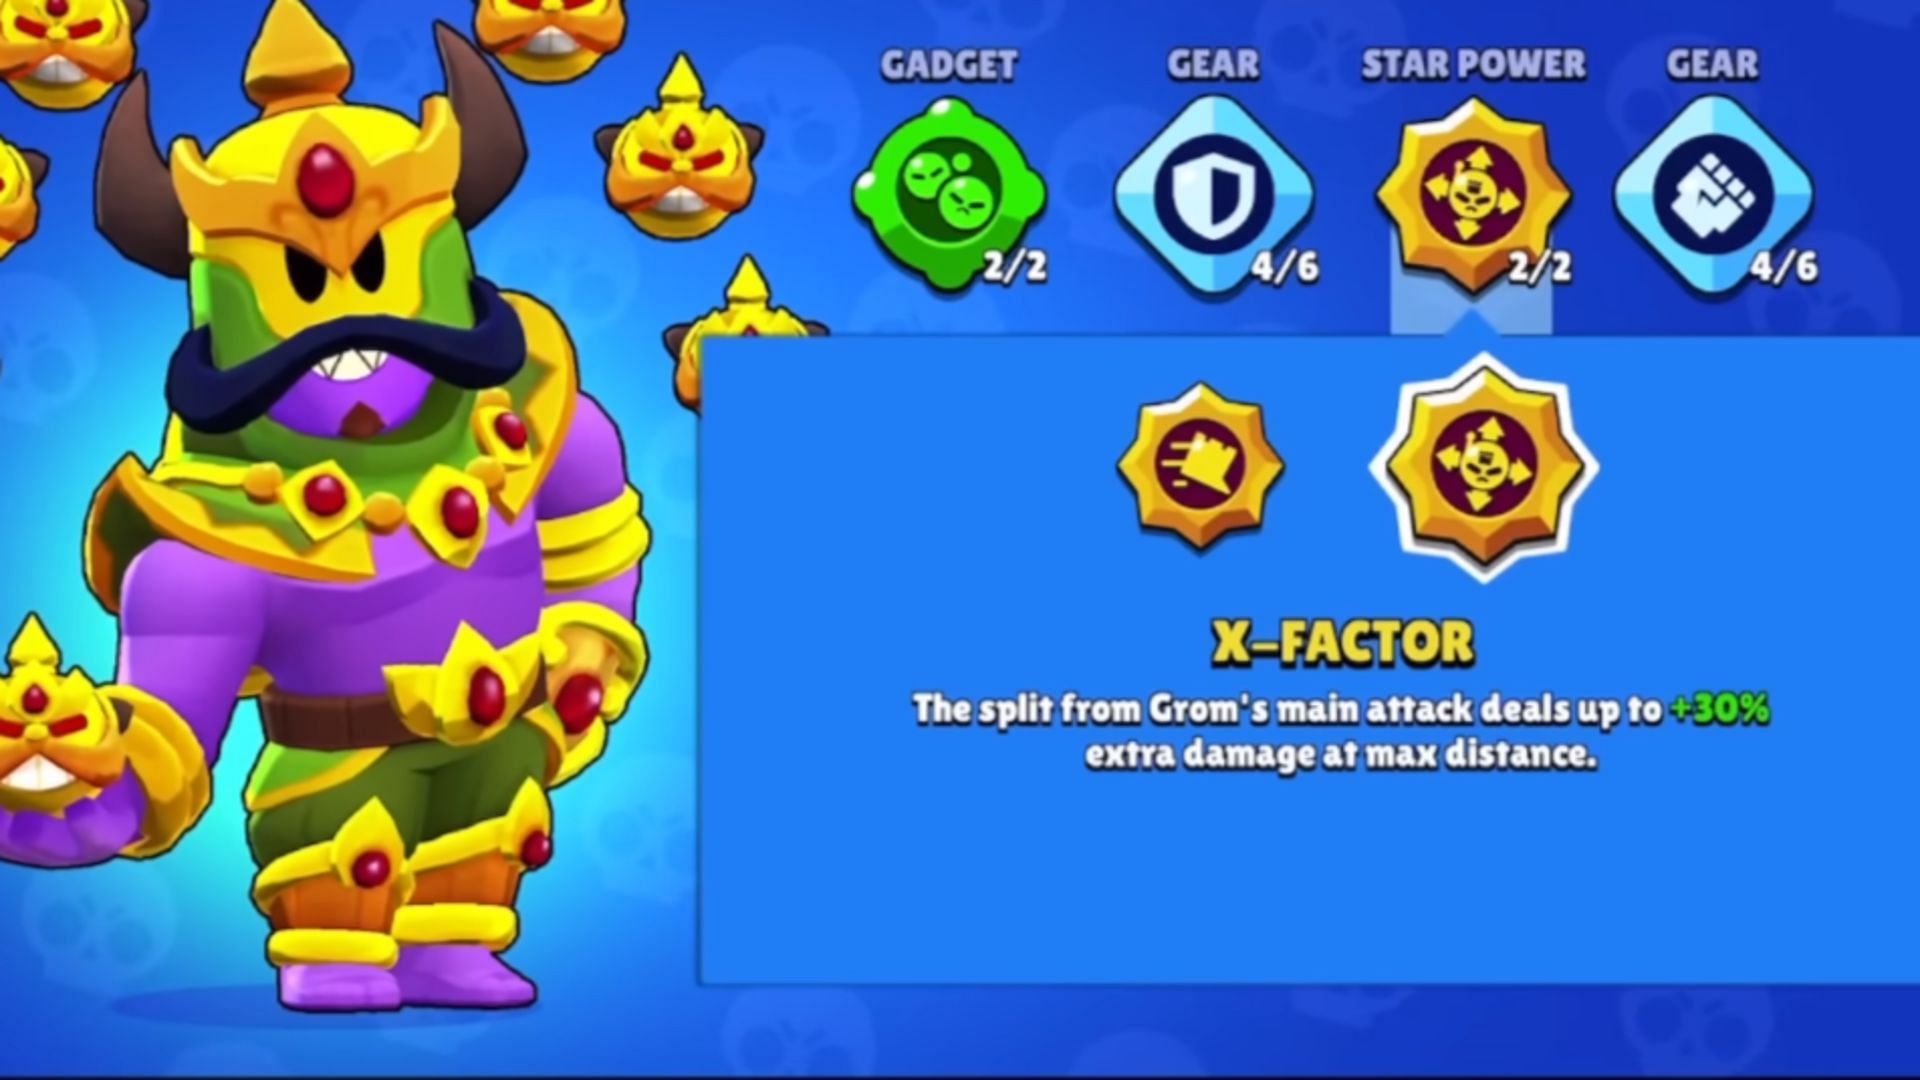 X-Factor Star Power (Image via Supercell)